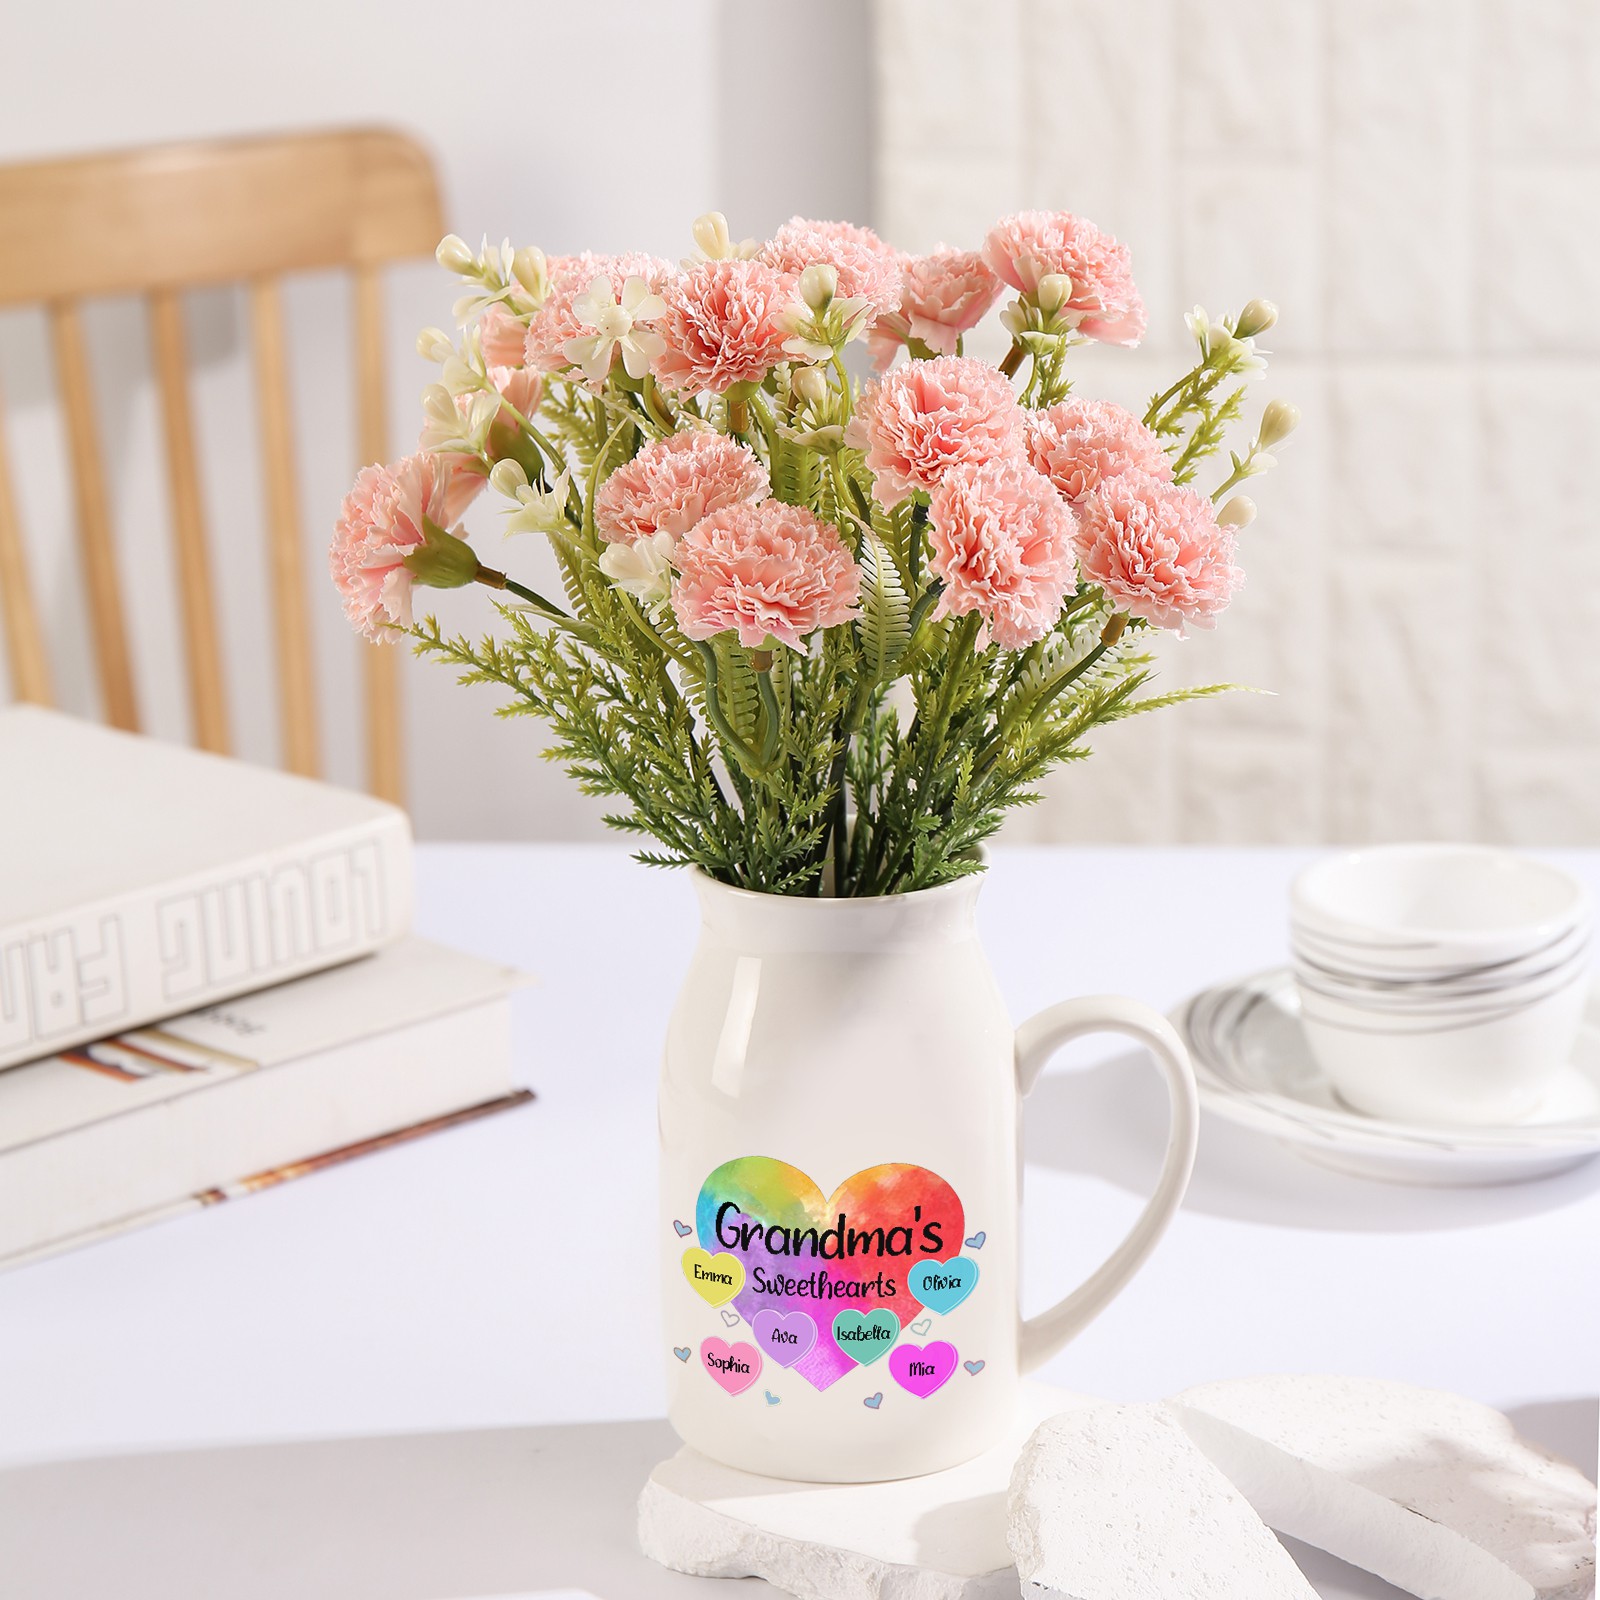 6 Names - Personalized Customizable Name Colorful Love Heart Style Ceramic Vase as a Gift for Grandma